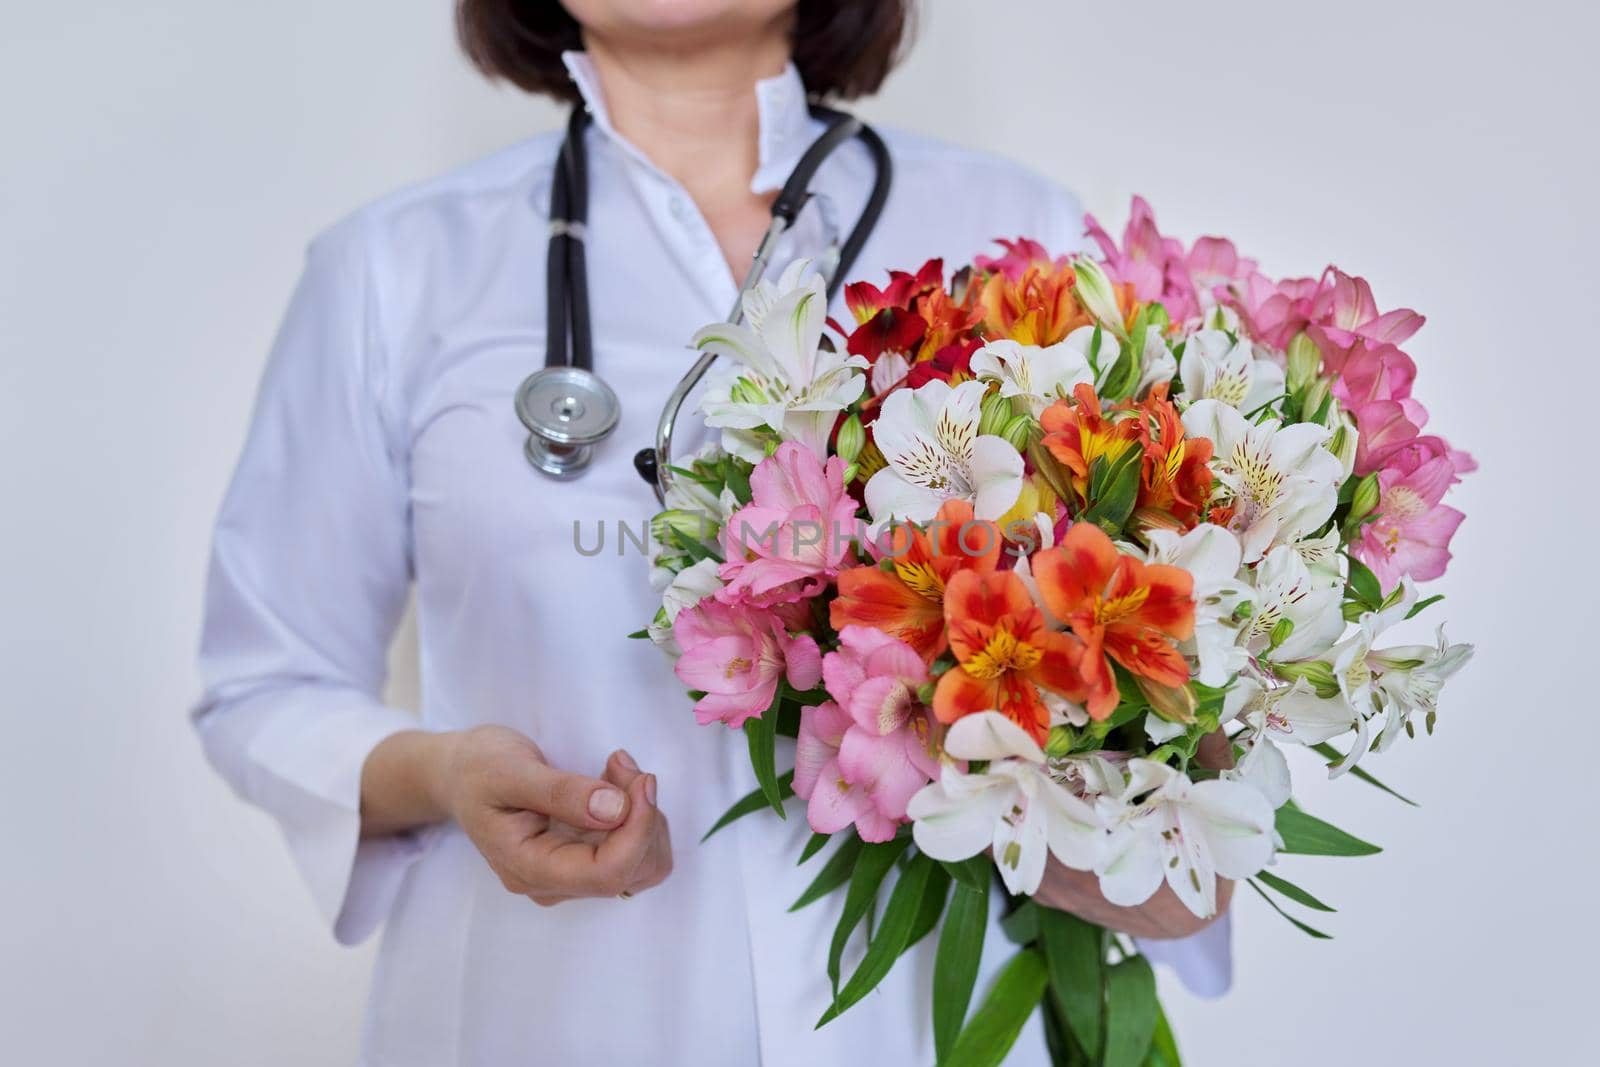 Close-up of bouquet of flowers in hands of female doctor. Medic, pharmacist in white uniform with stethoscope on light background. International, National Doctor's Day, Nurse's Day, Health Day